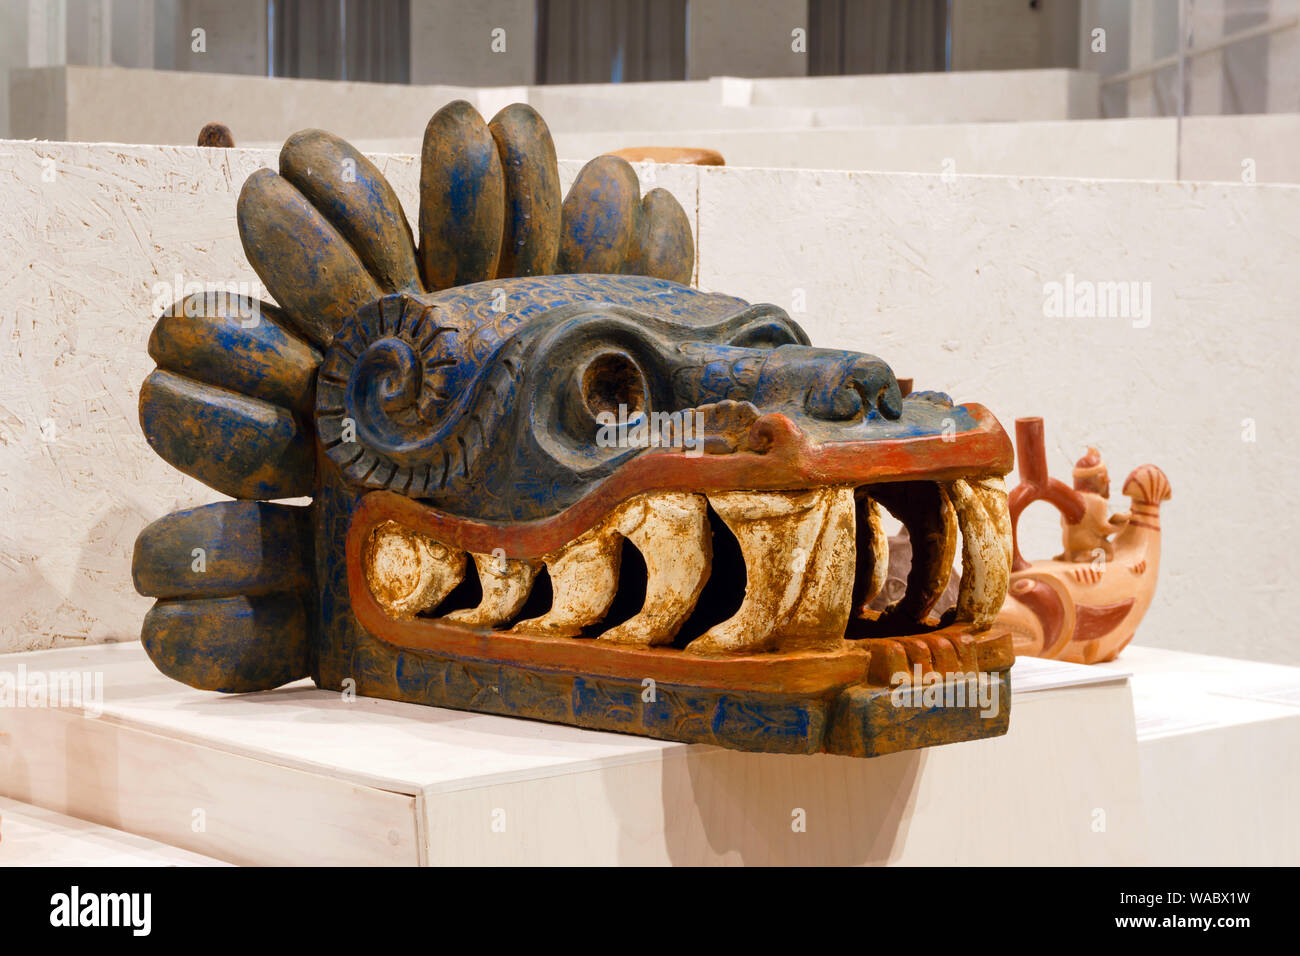 Yekaterinburg, Russia - head of Quetzalcoatl from the Pyramid of the Feathered Serpent in Teotihuacan, Mexico, AD 200-300, in the museum Stock Photo